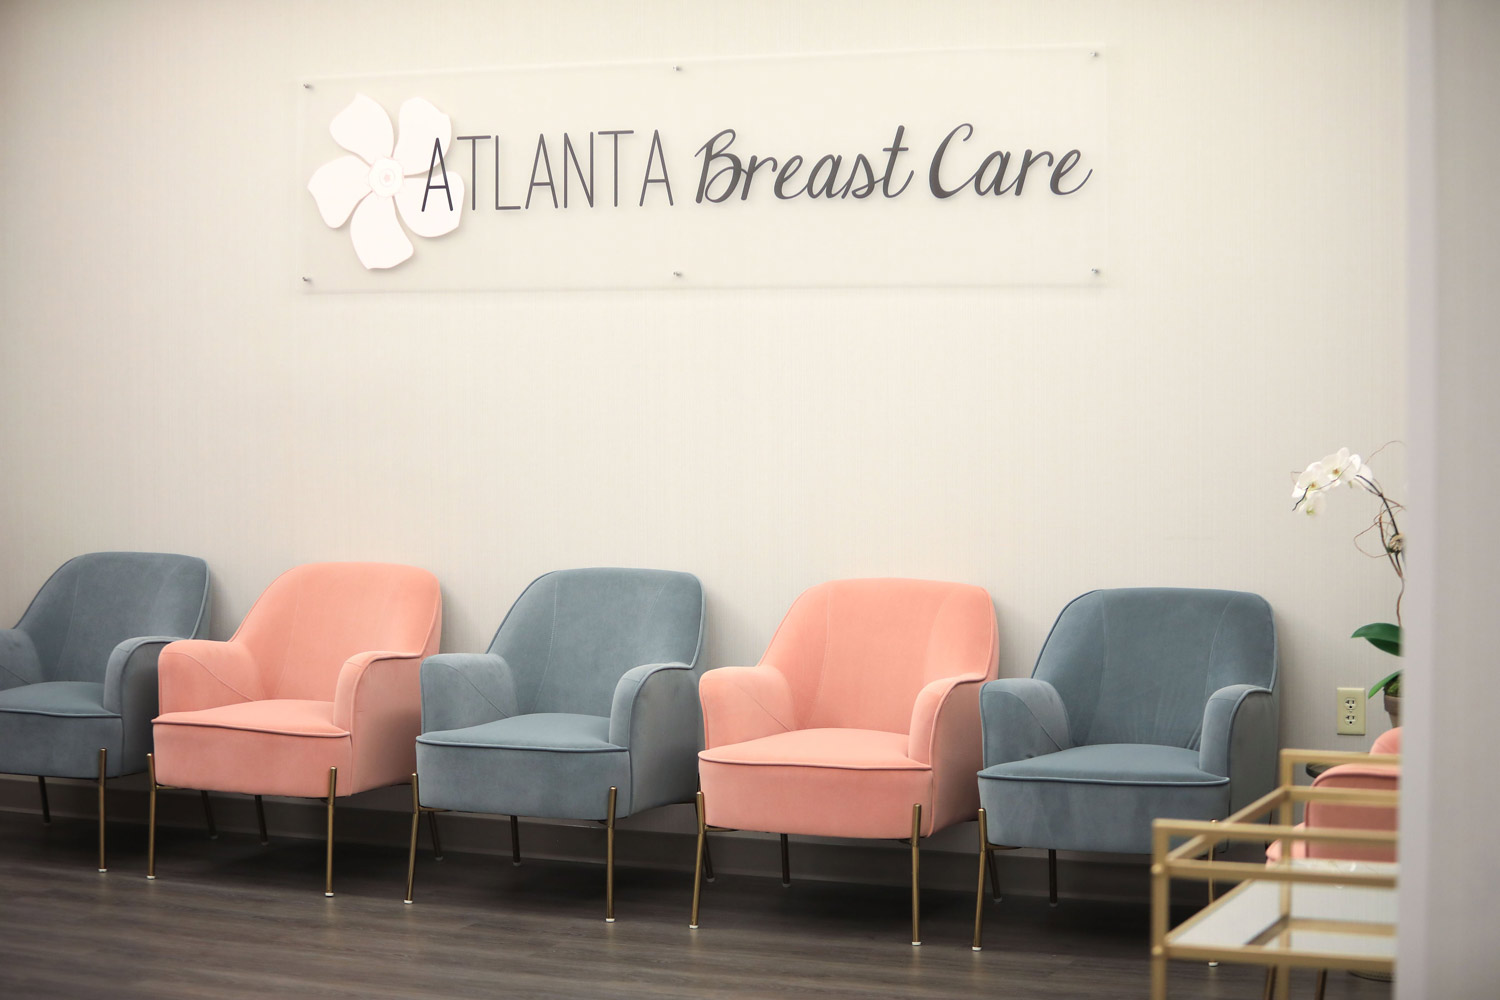 Interior office for Atlanta Breast Care showing seating and logo on wall